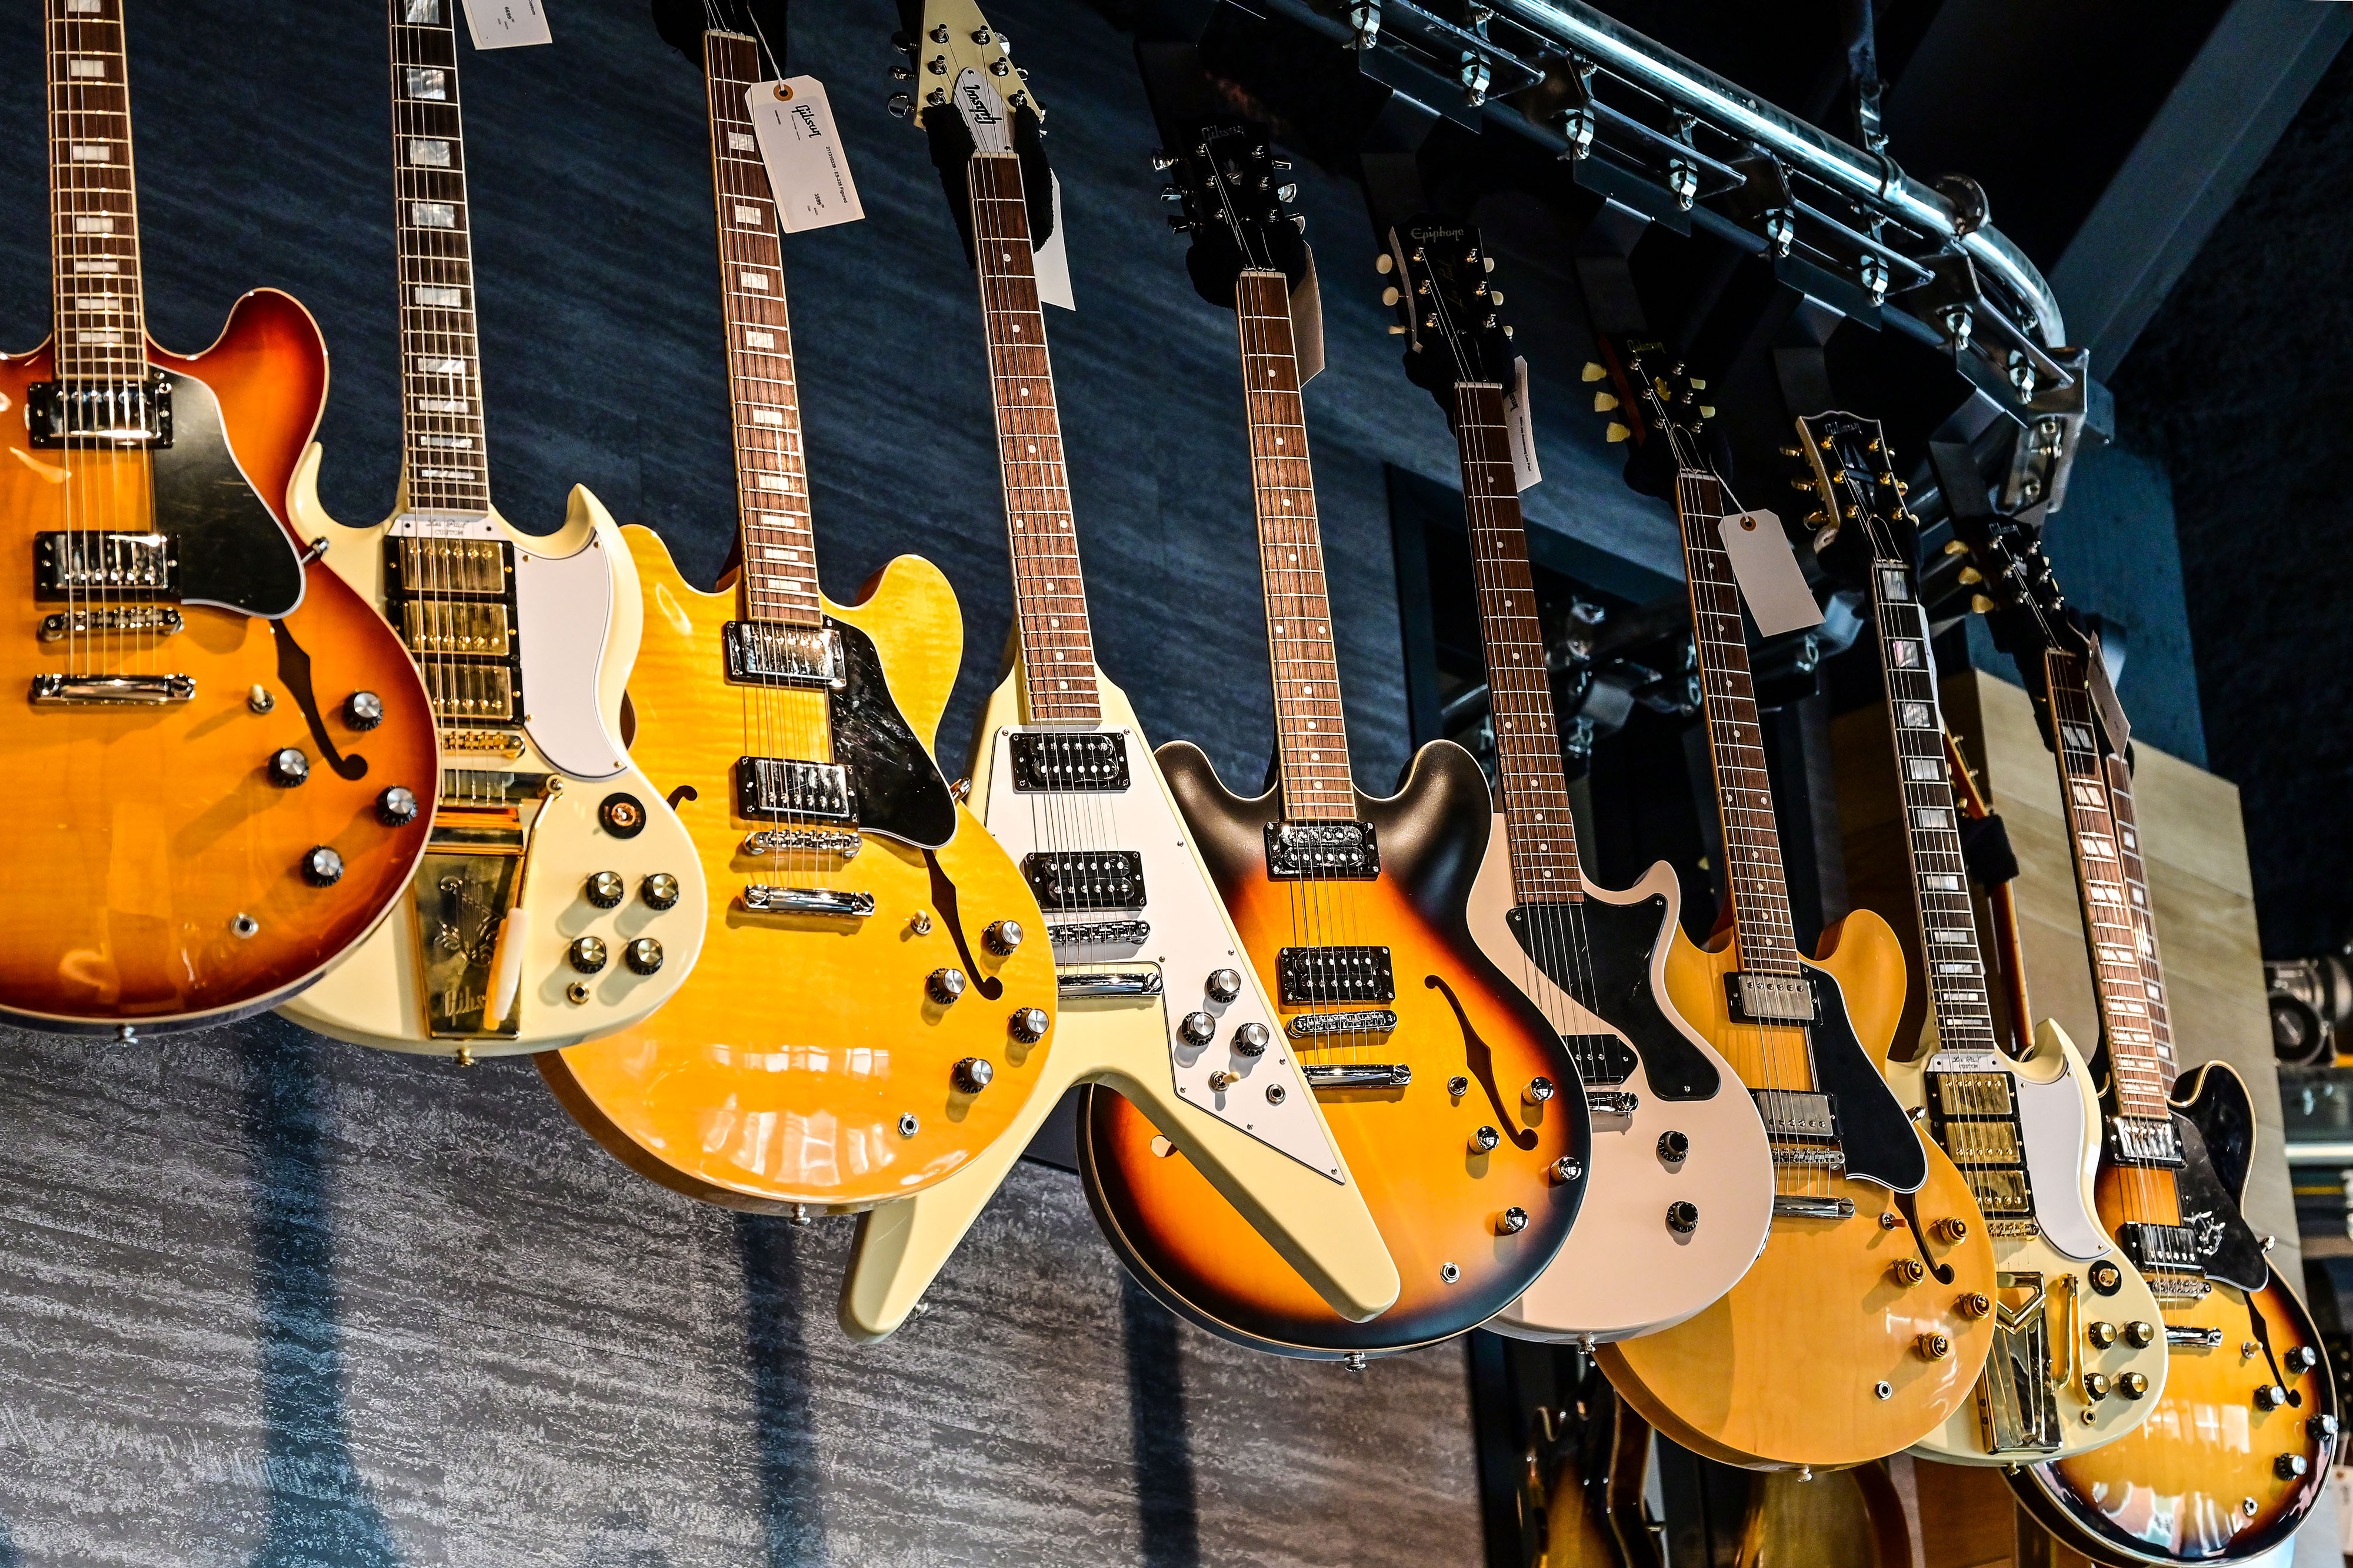 Rows of Gibson electric guitars including Les Pauls, Flying Vs, SGs, and ES-335s rotate along the ceiling at the Gibson Garage, a music store and guitar archive. Photo by David Tulis.